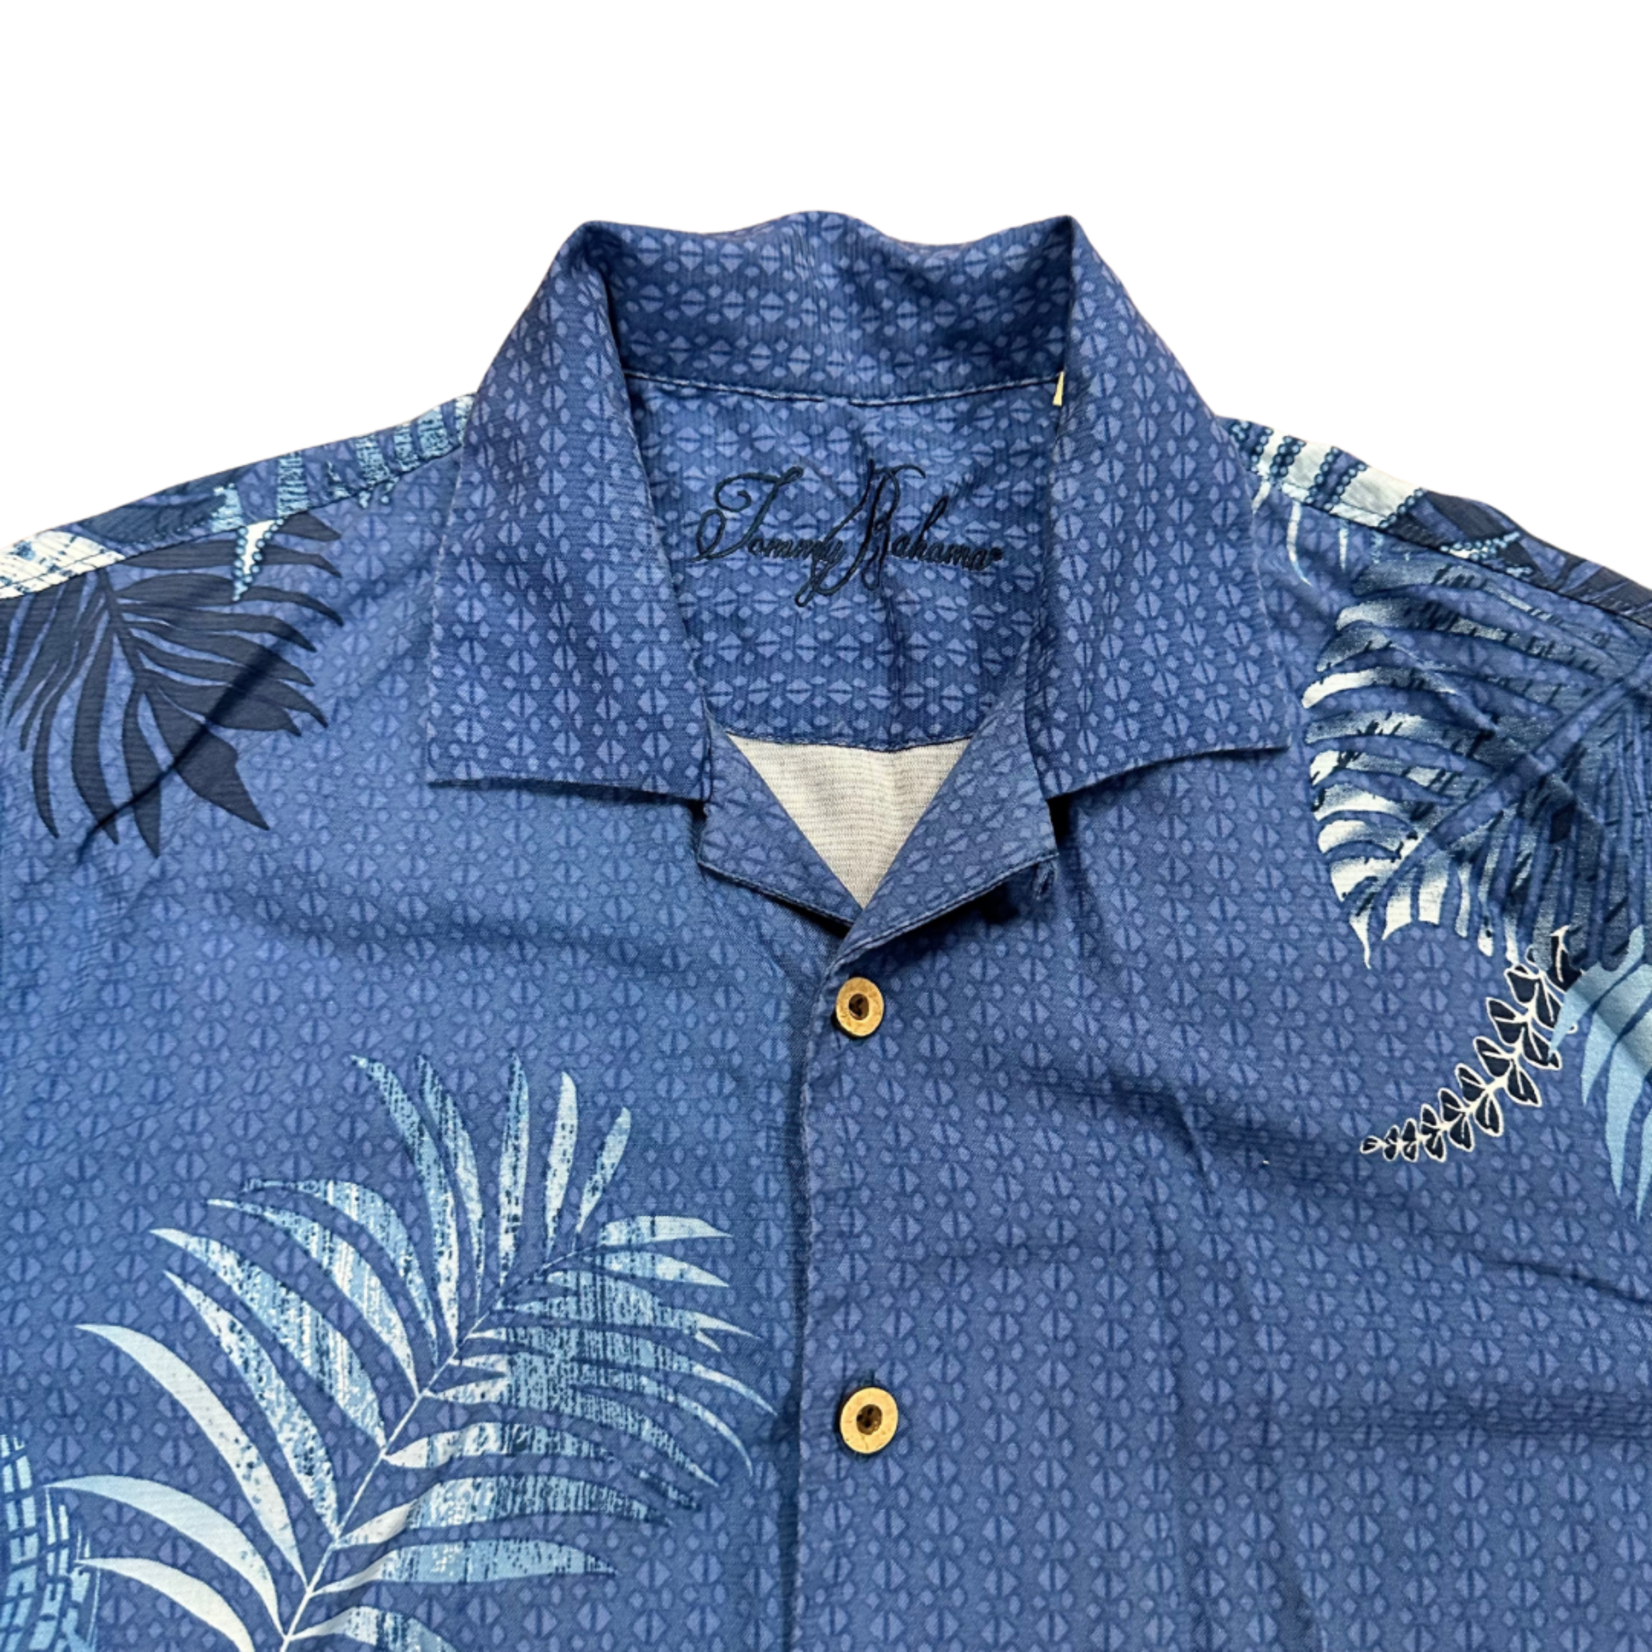 Mission Zero ReLoved Men's Aloha Shirt - Tommy Bahama - 100% Silk - Blue Leaf w/Coconut Buttons - M